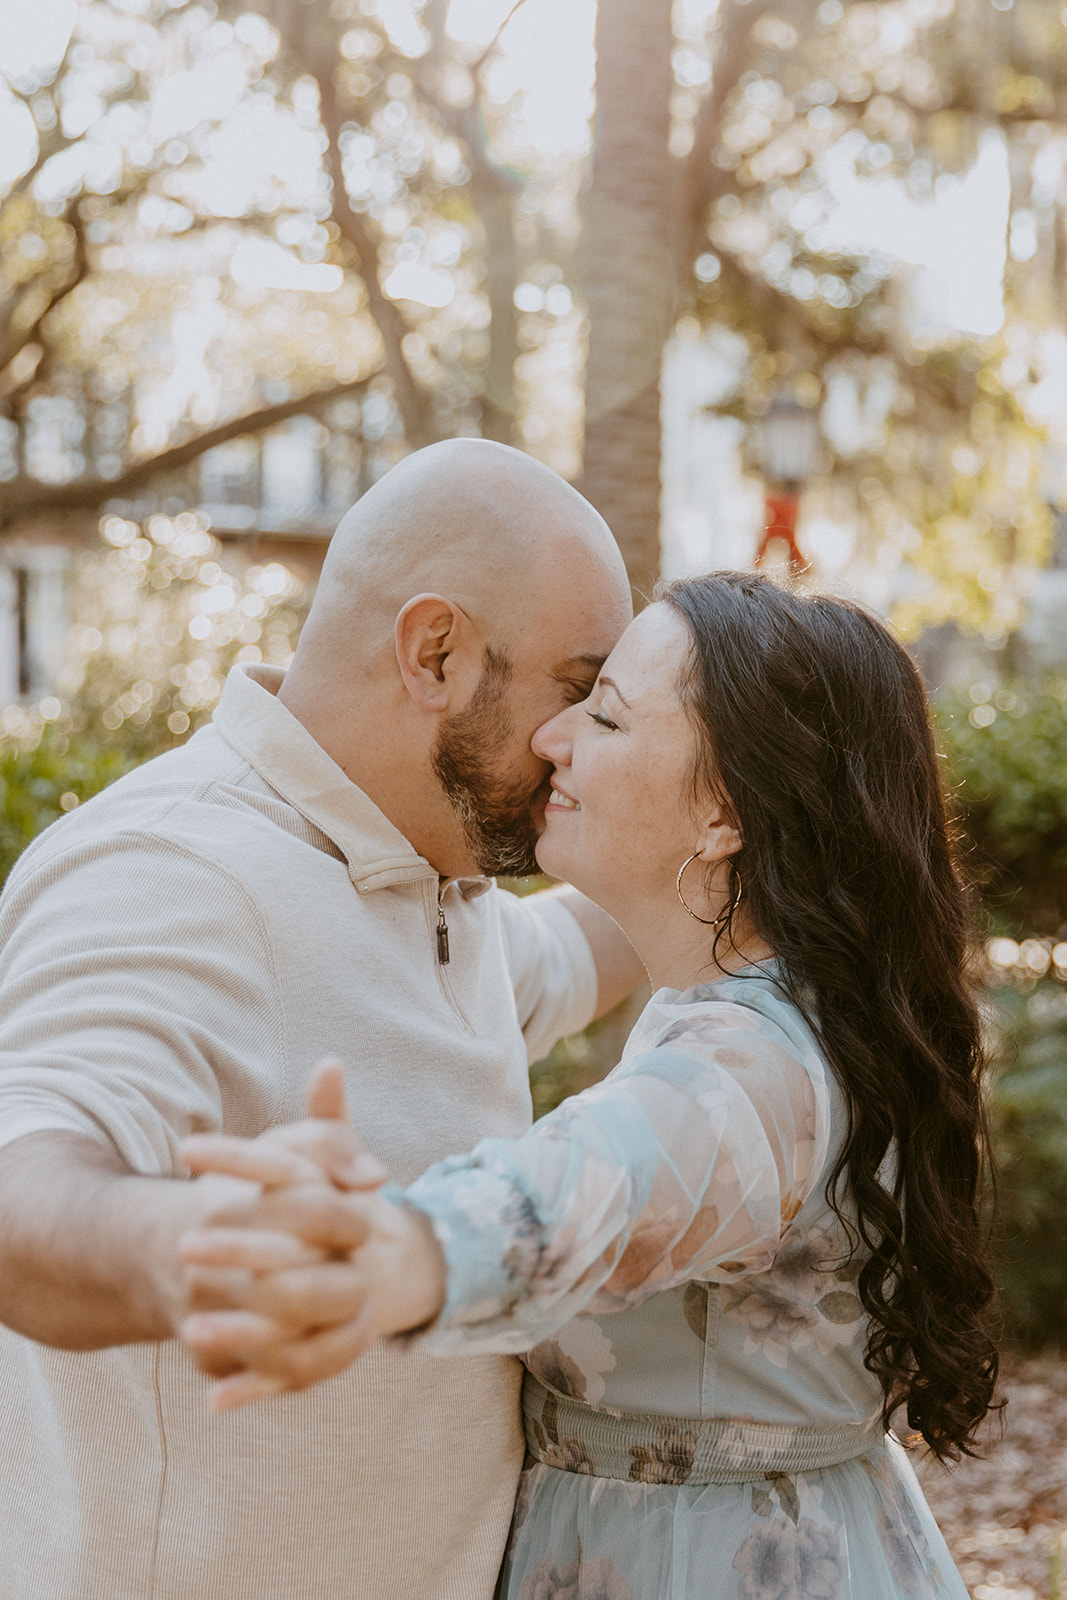 A man and a woman with long dark hair outdoors in a garden-like setting. Both have their eyes closed, showing a moment of affection in Downtown Historic district savannah ga